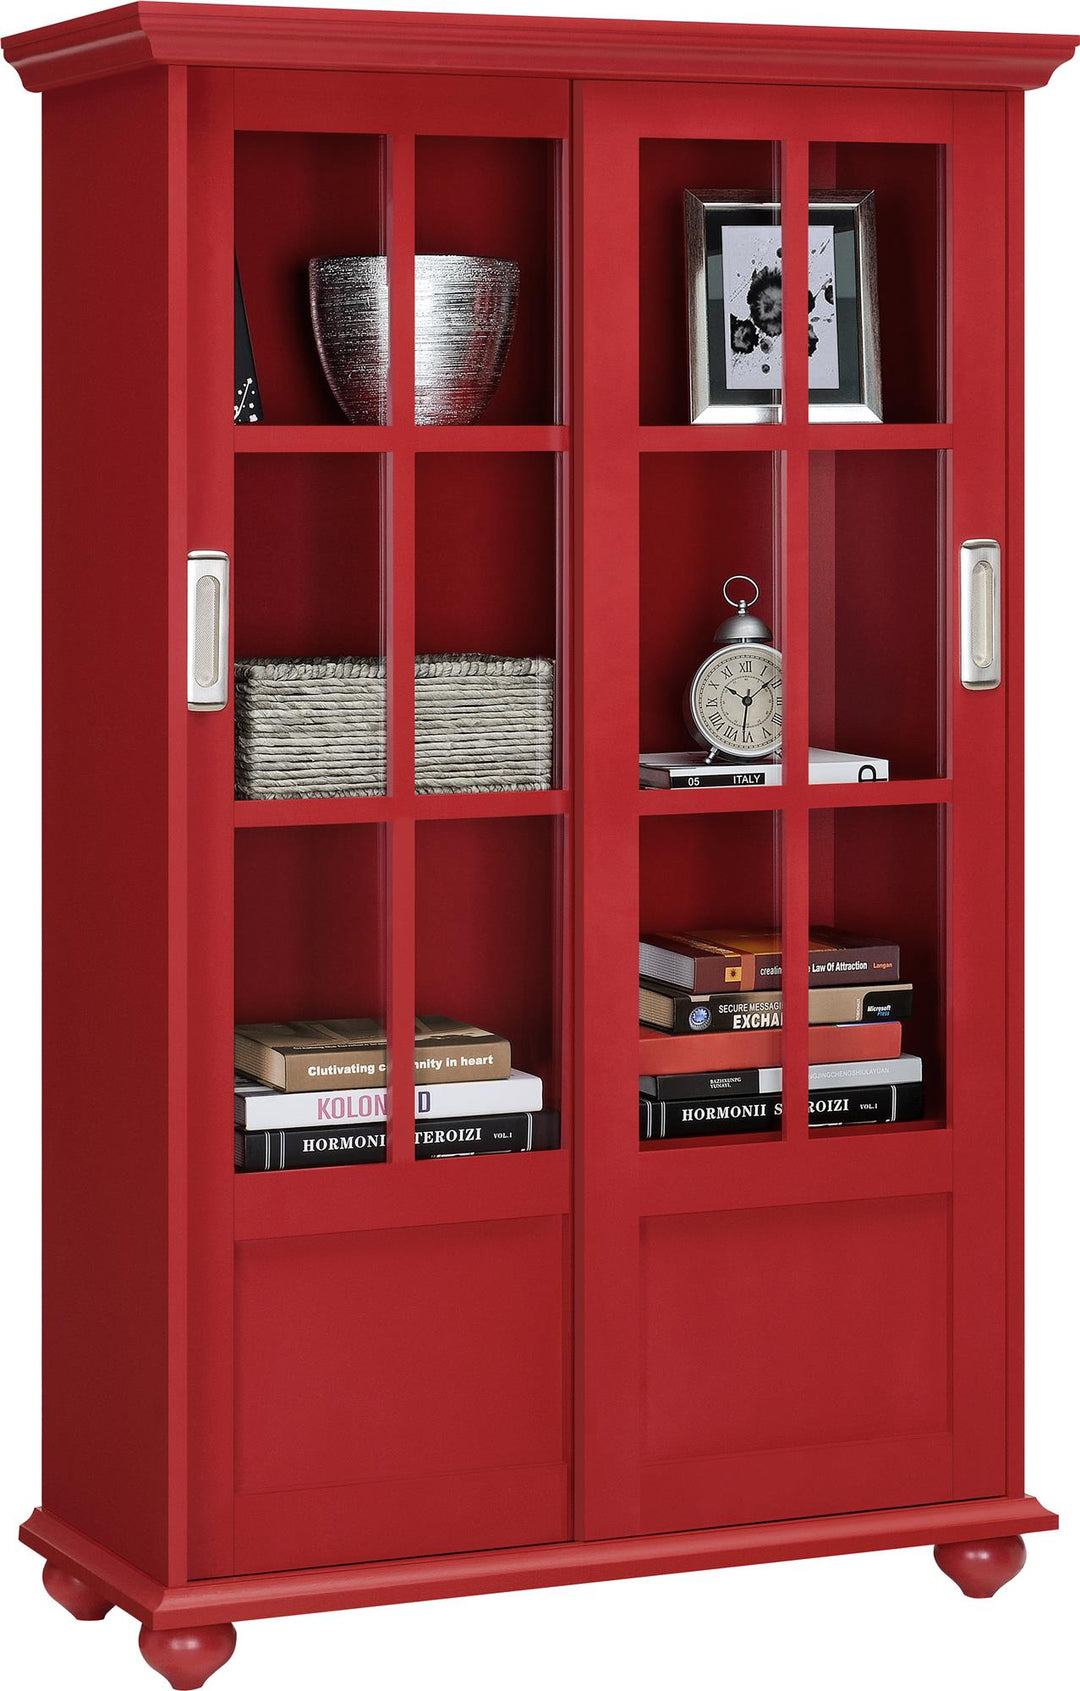 Organize your books with stylish Aaron Lane tall bookcase -  Red